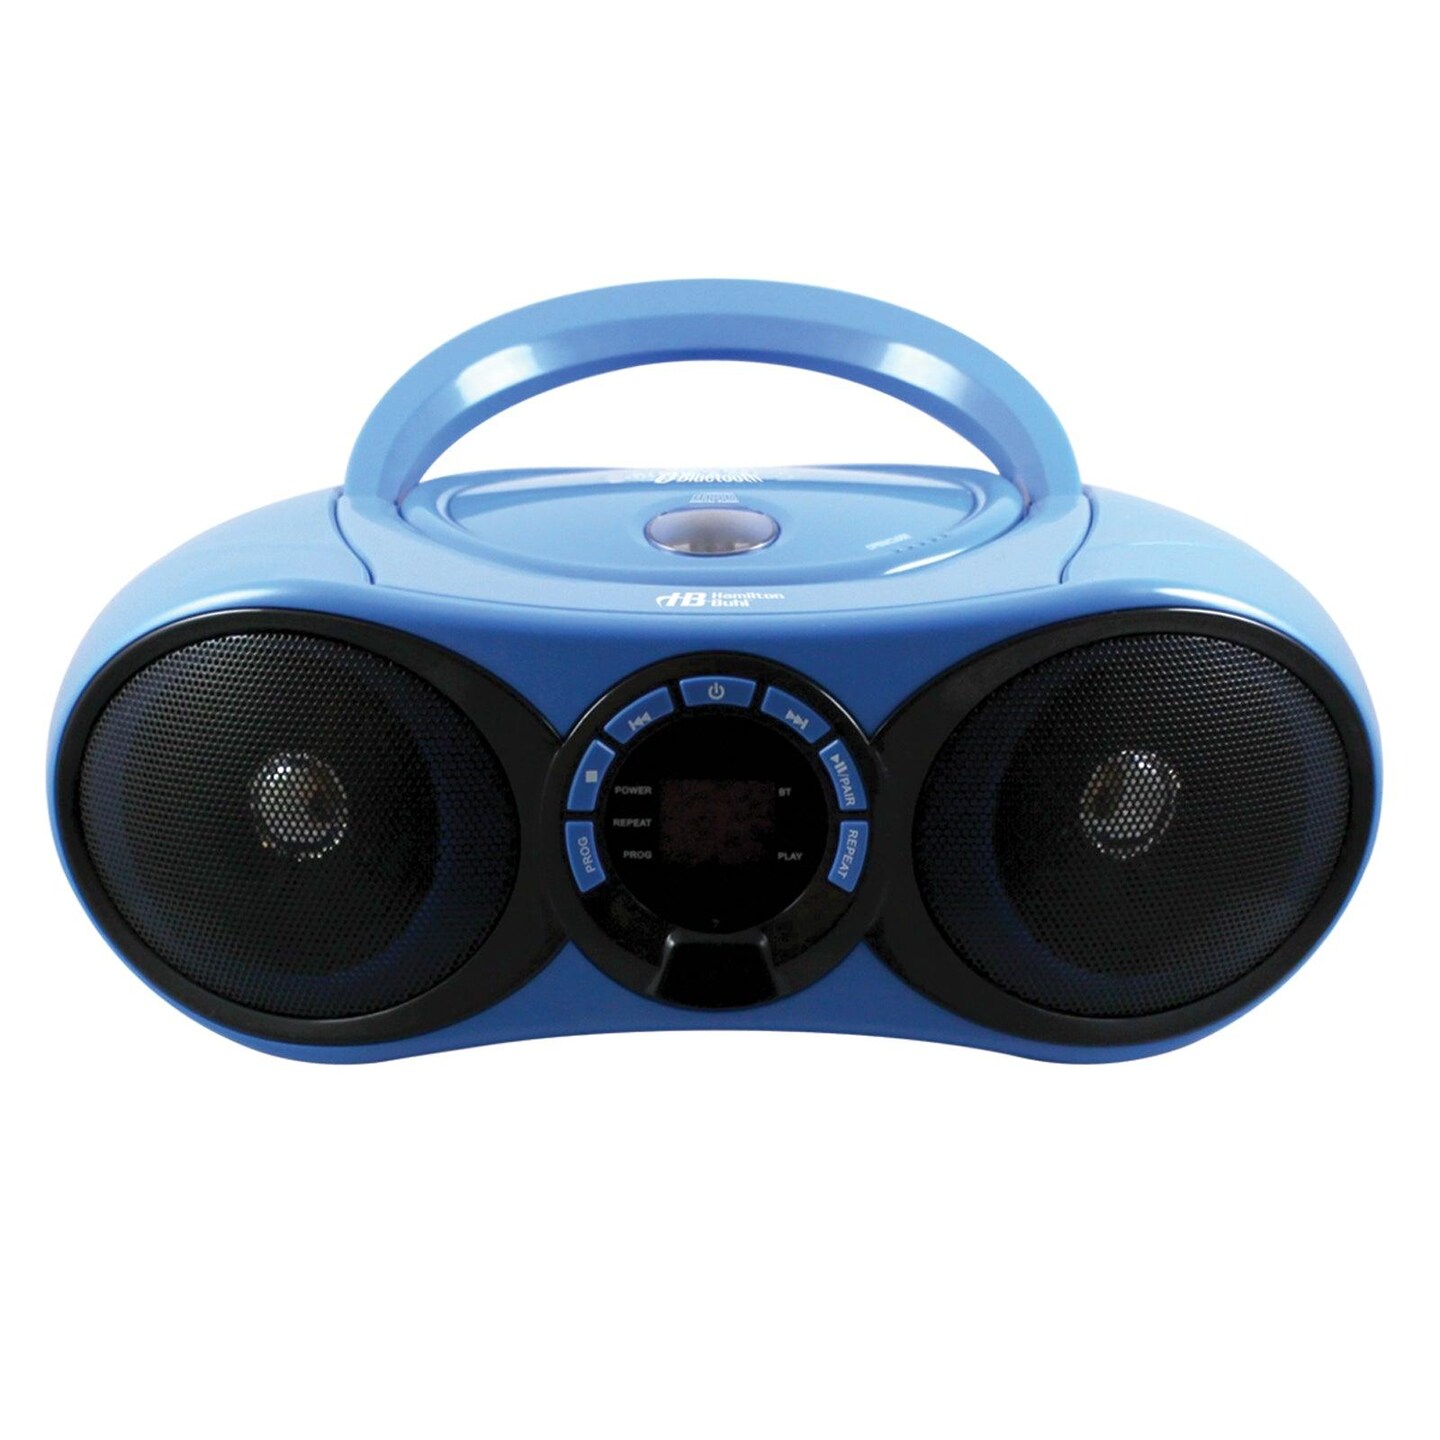 AudioMVP Boombox CD/FM Media Player with Bluetooth Receiver